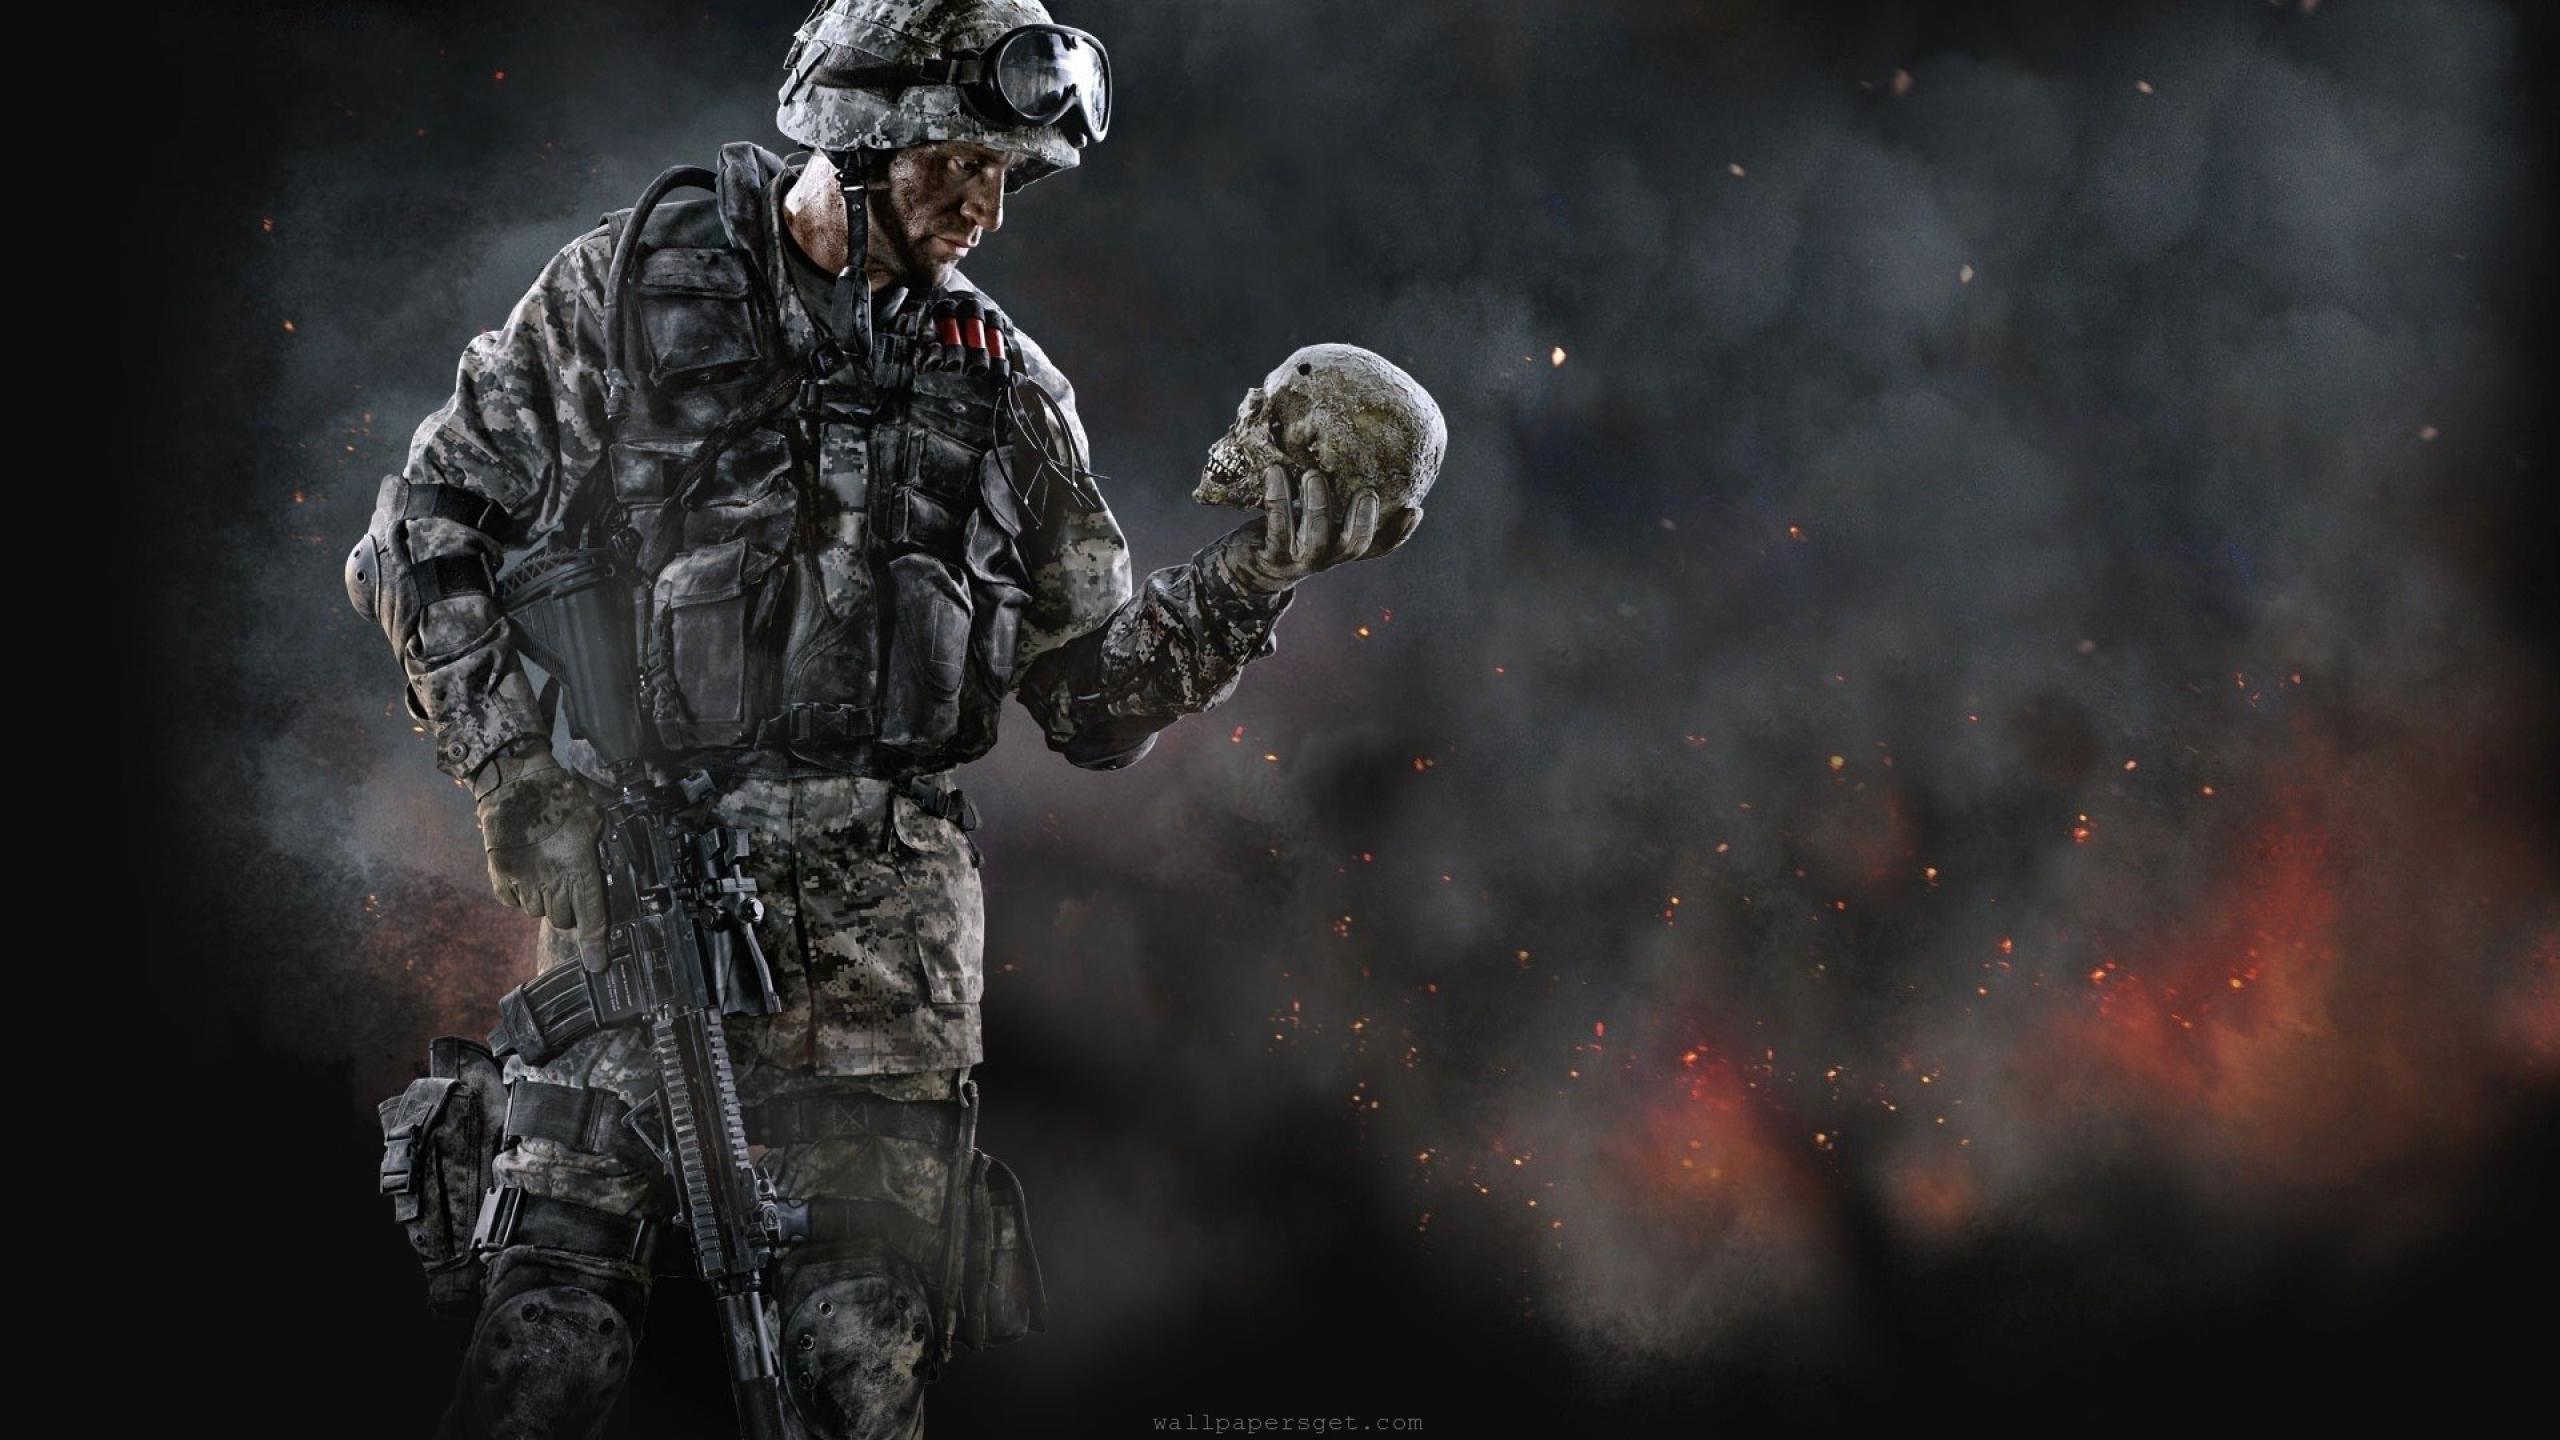 Wolfpack Medal Of Honor War Get Wallpaper 2560x1440 px Free